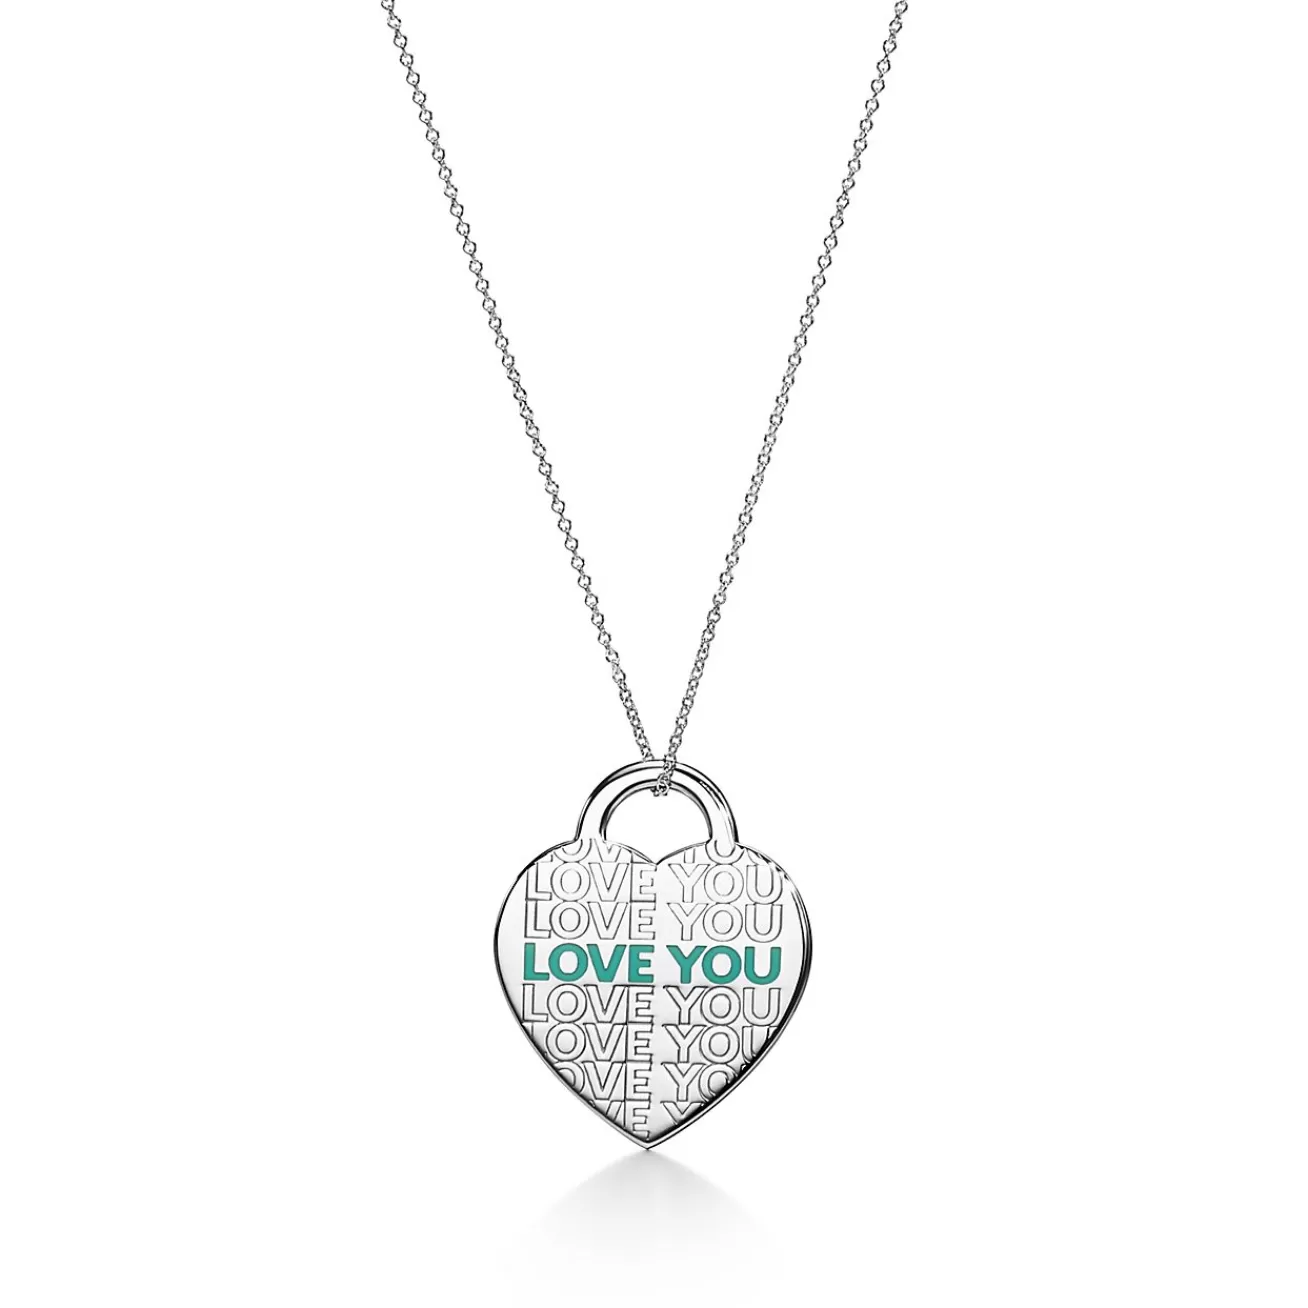 Tiffany & Co. Return to Tiffany® "Love You" Heart Tag Pendant in Silver and Tiffany Blue® | ^ Necklaces & Pendants | Sterling Silver Jewelry